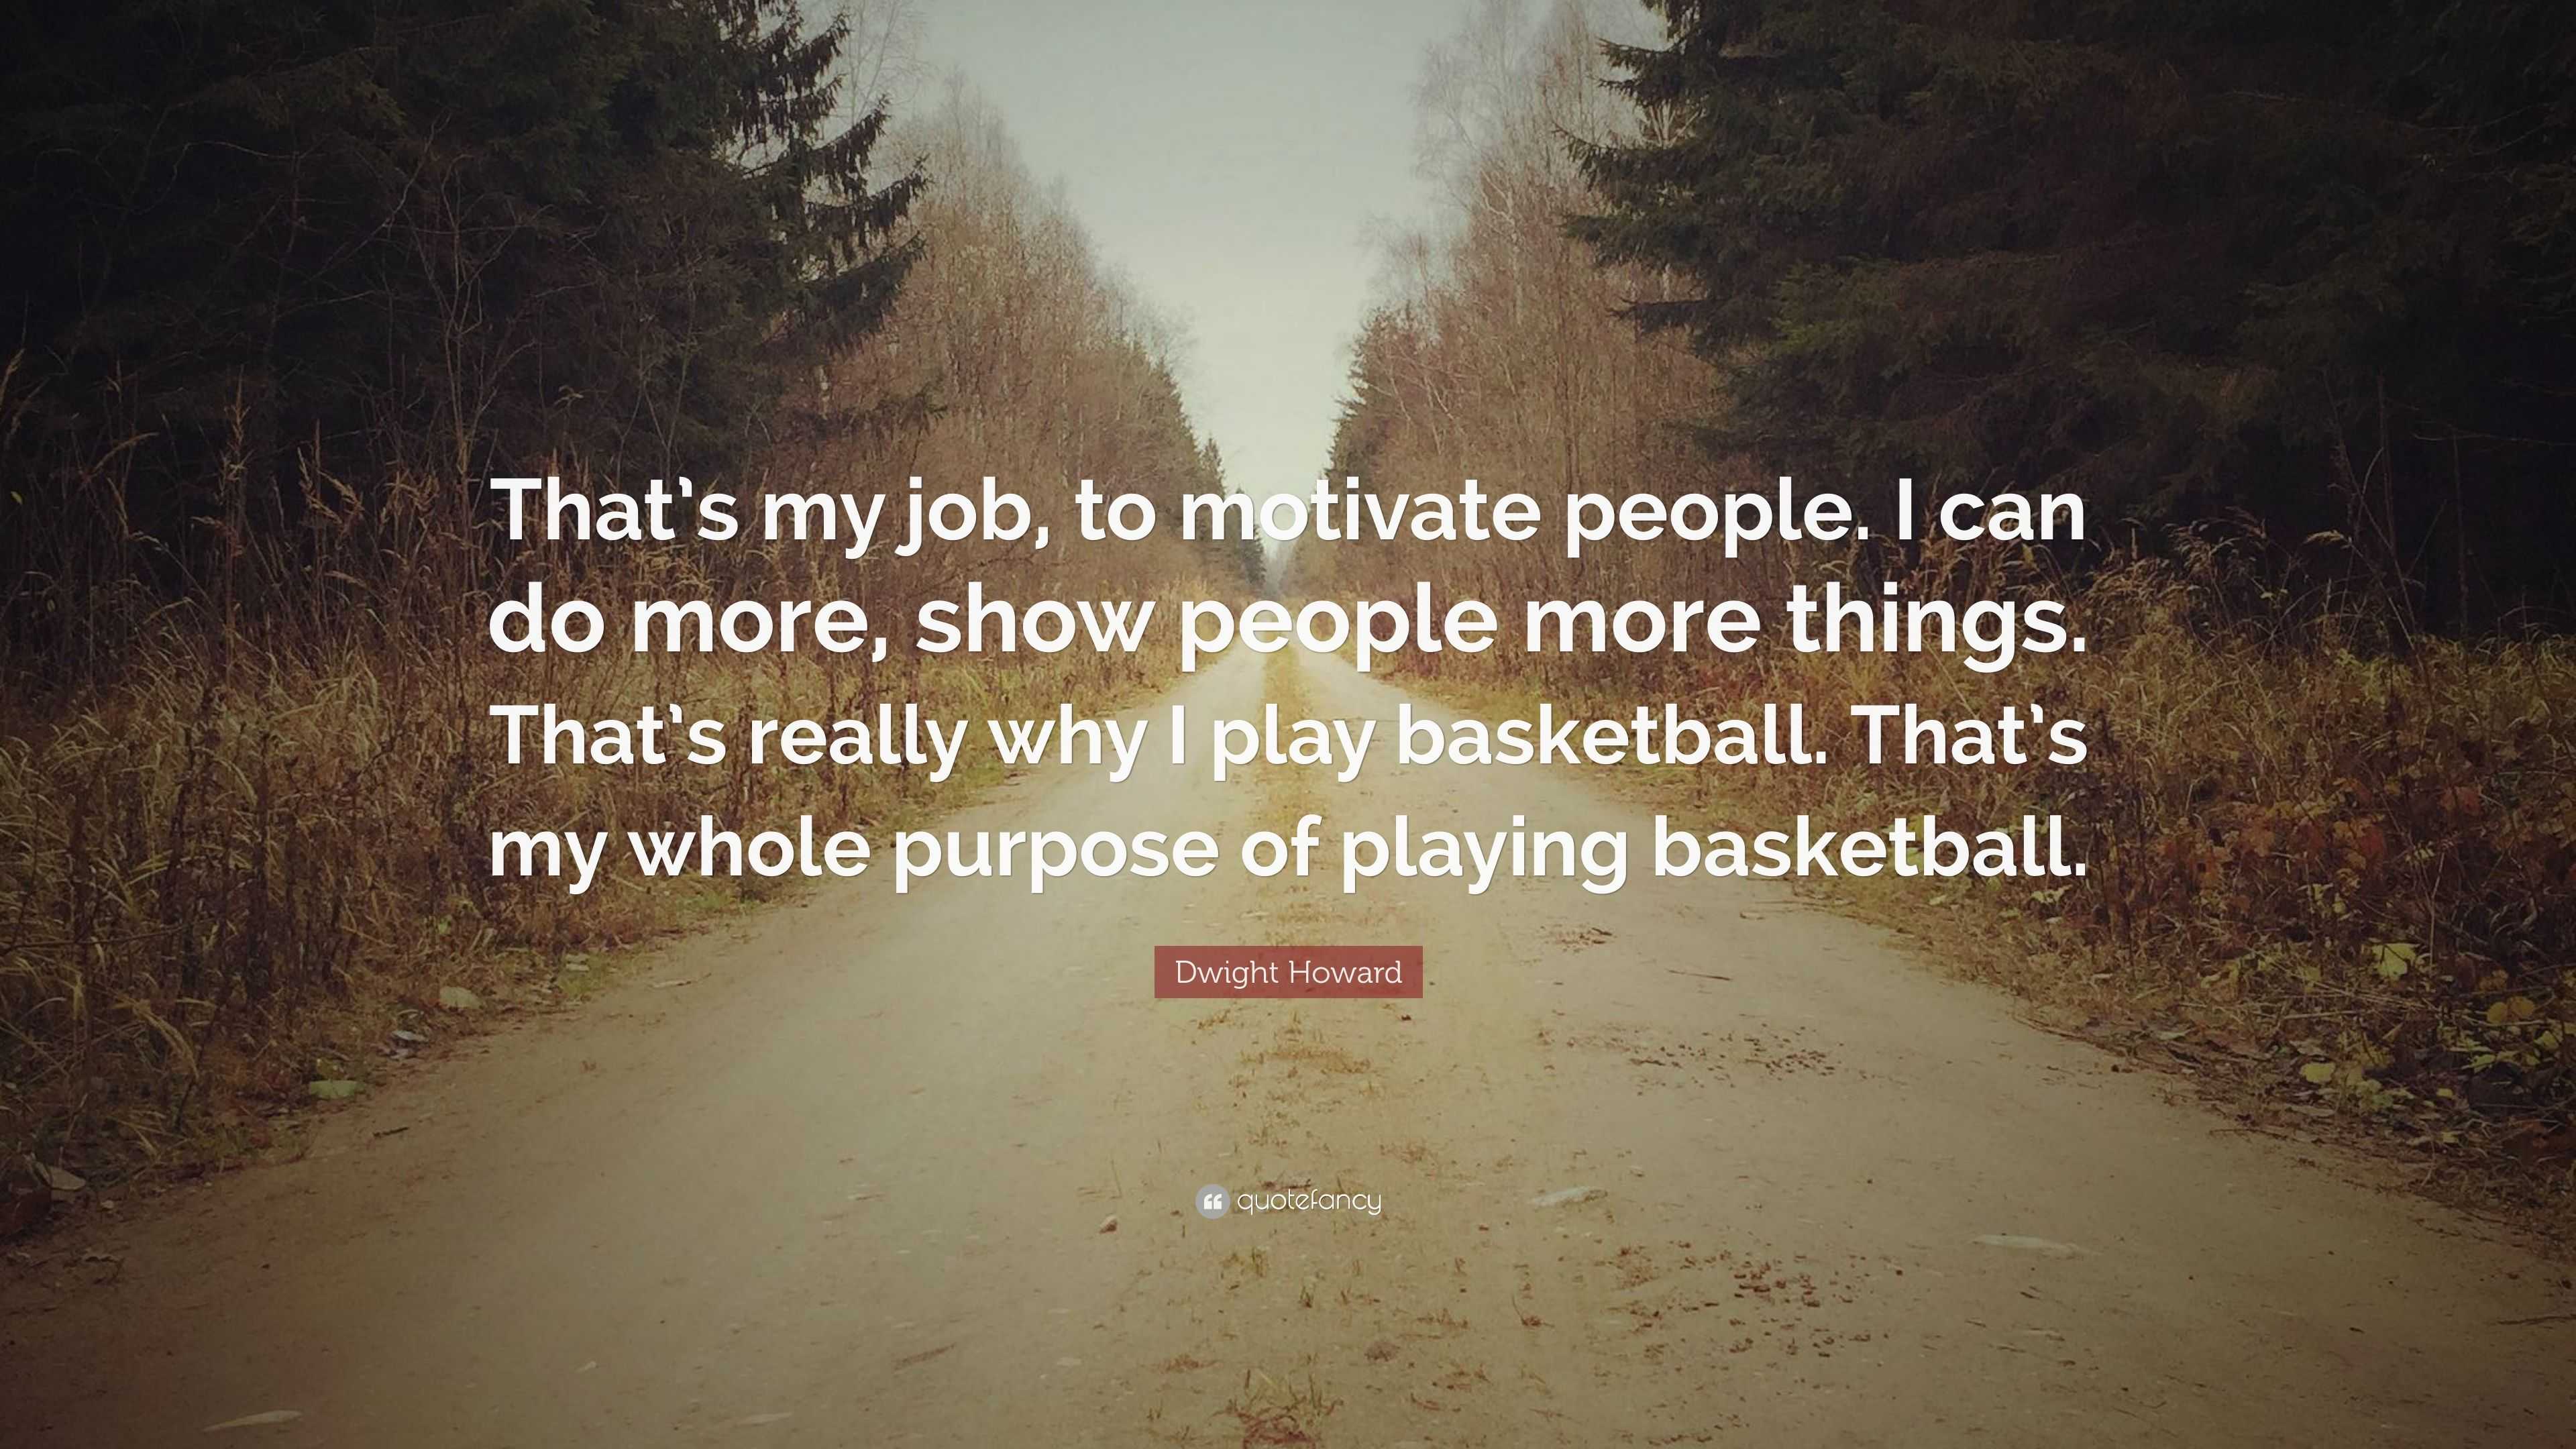 Dwight Howard Quote: “That’s my job, to motivate people. I can do more